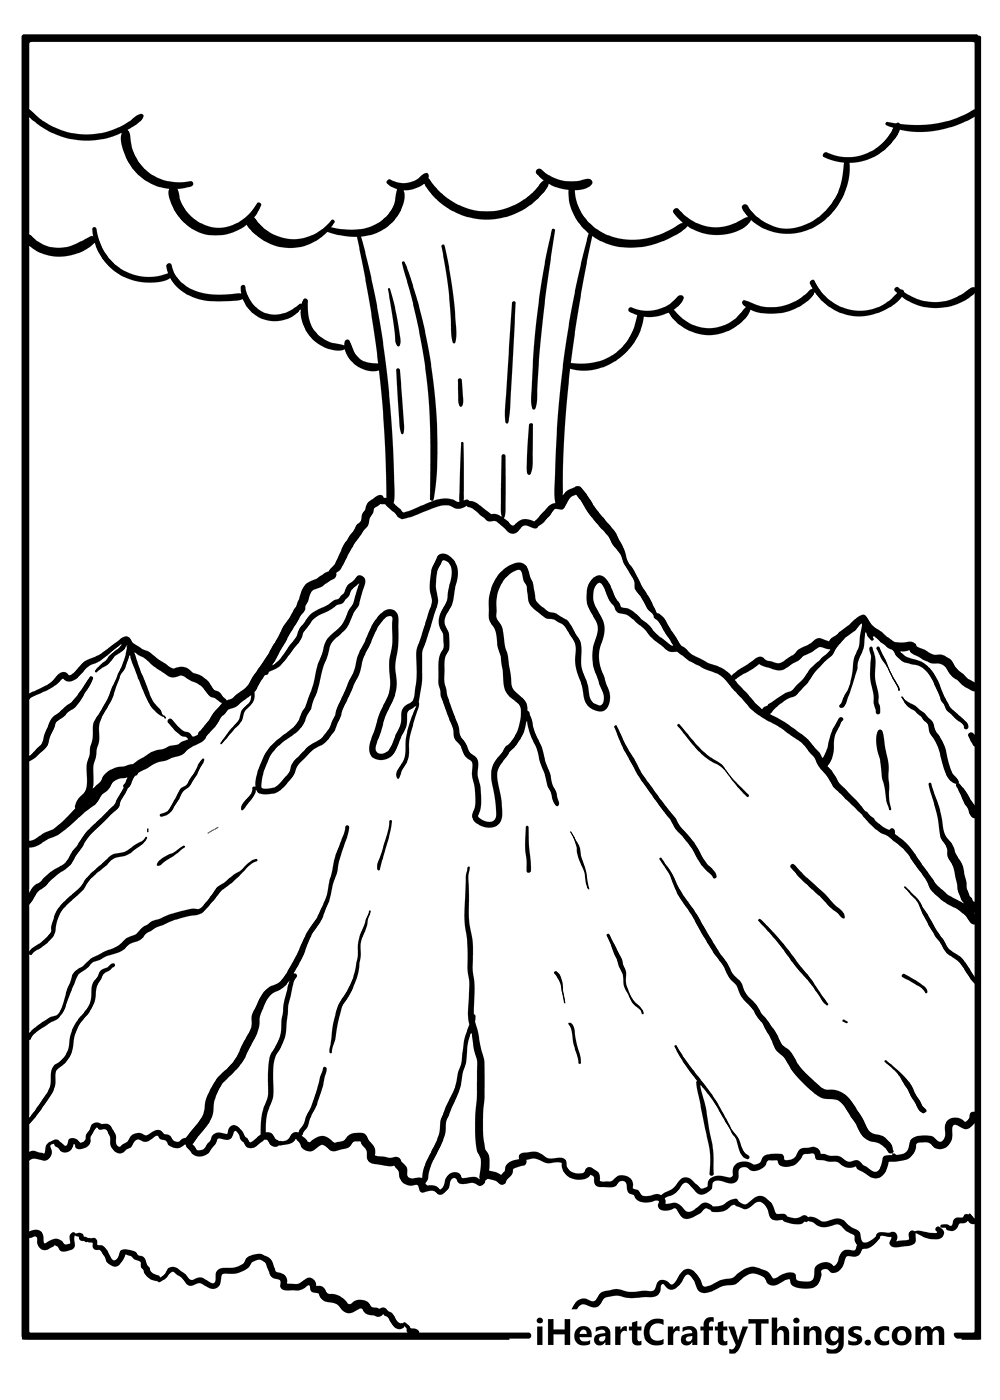 Volcano Coloring Pages for kids free download